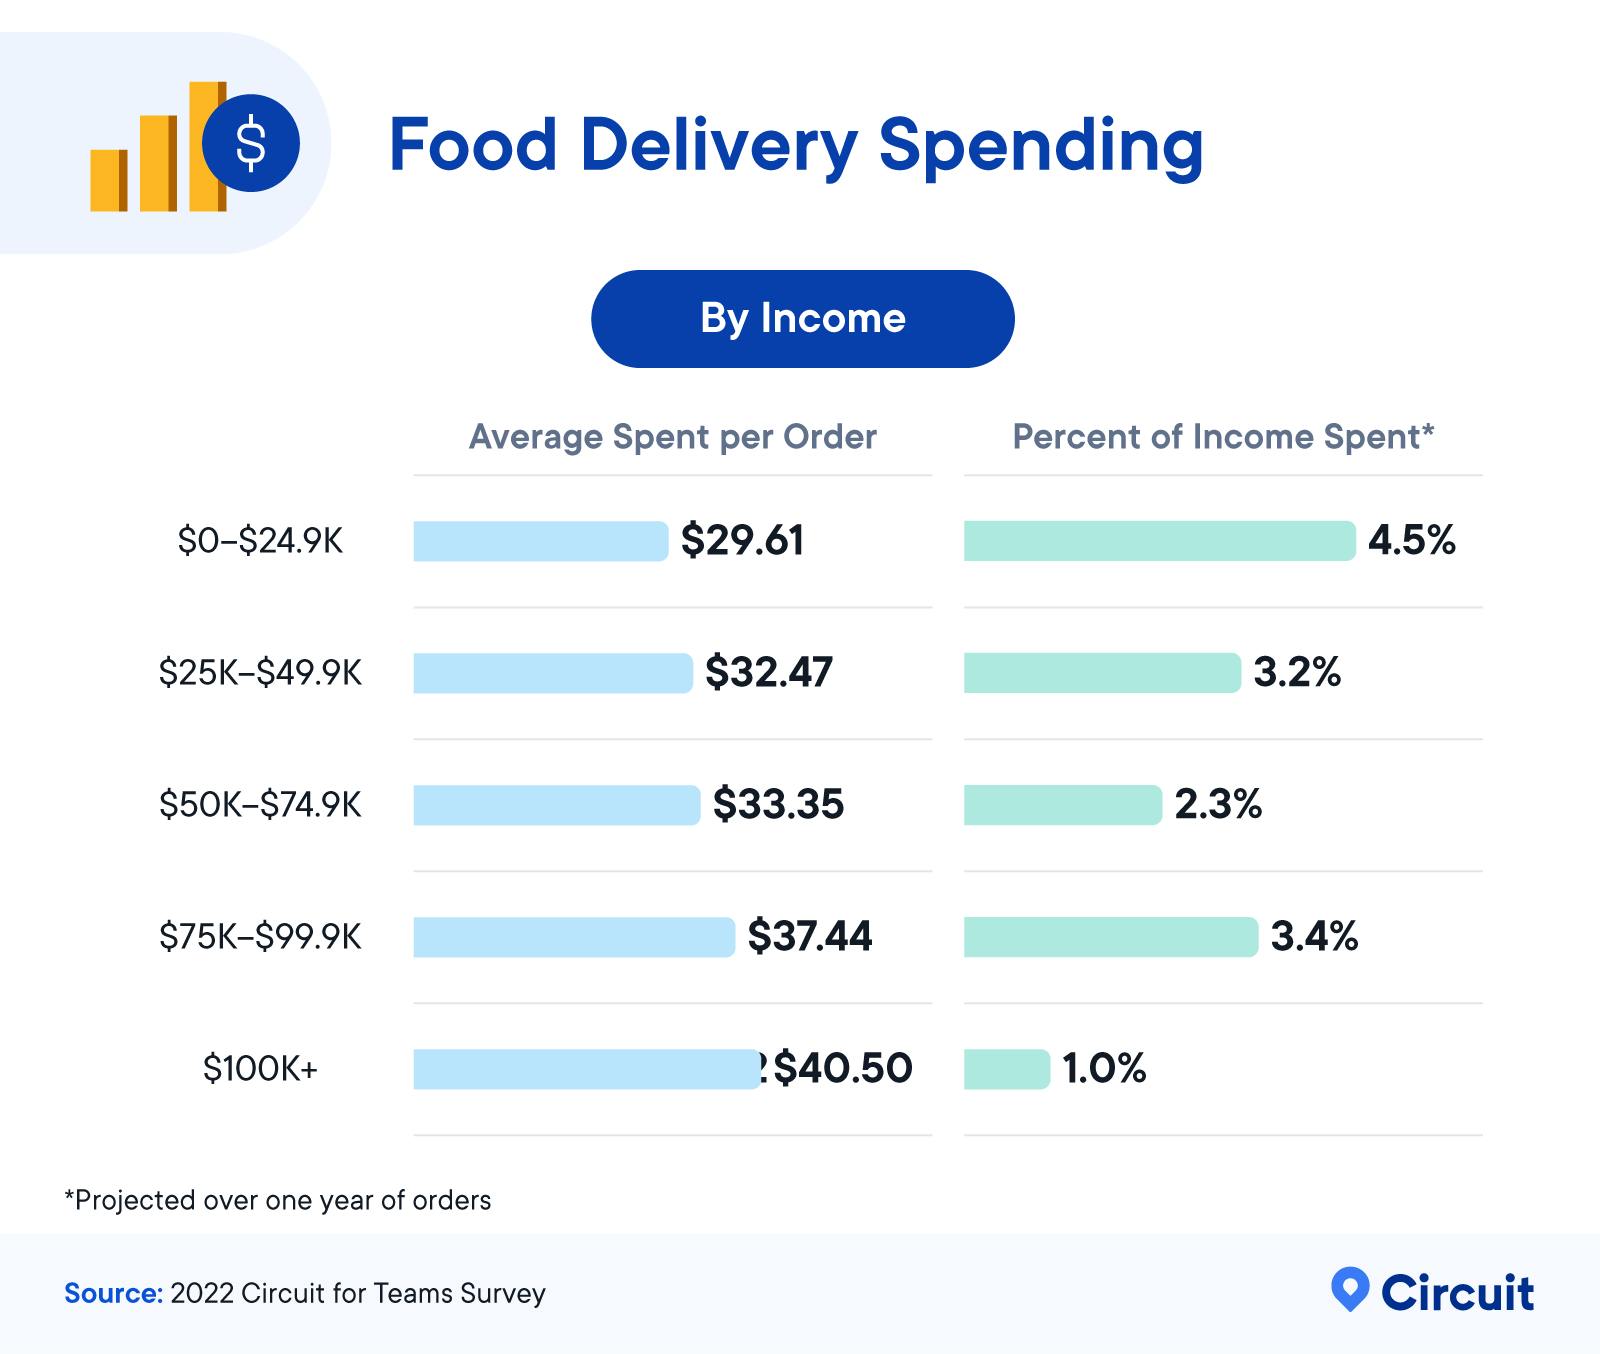 Food Delivery Spending by Income